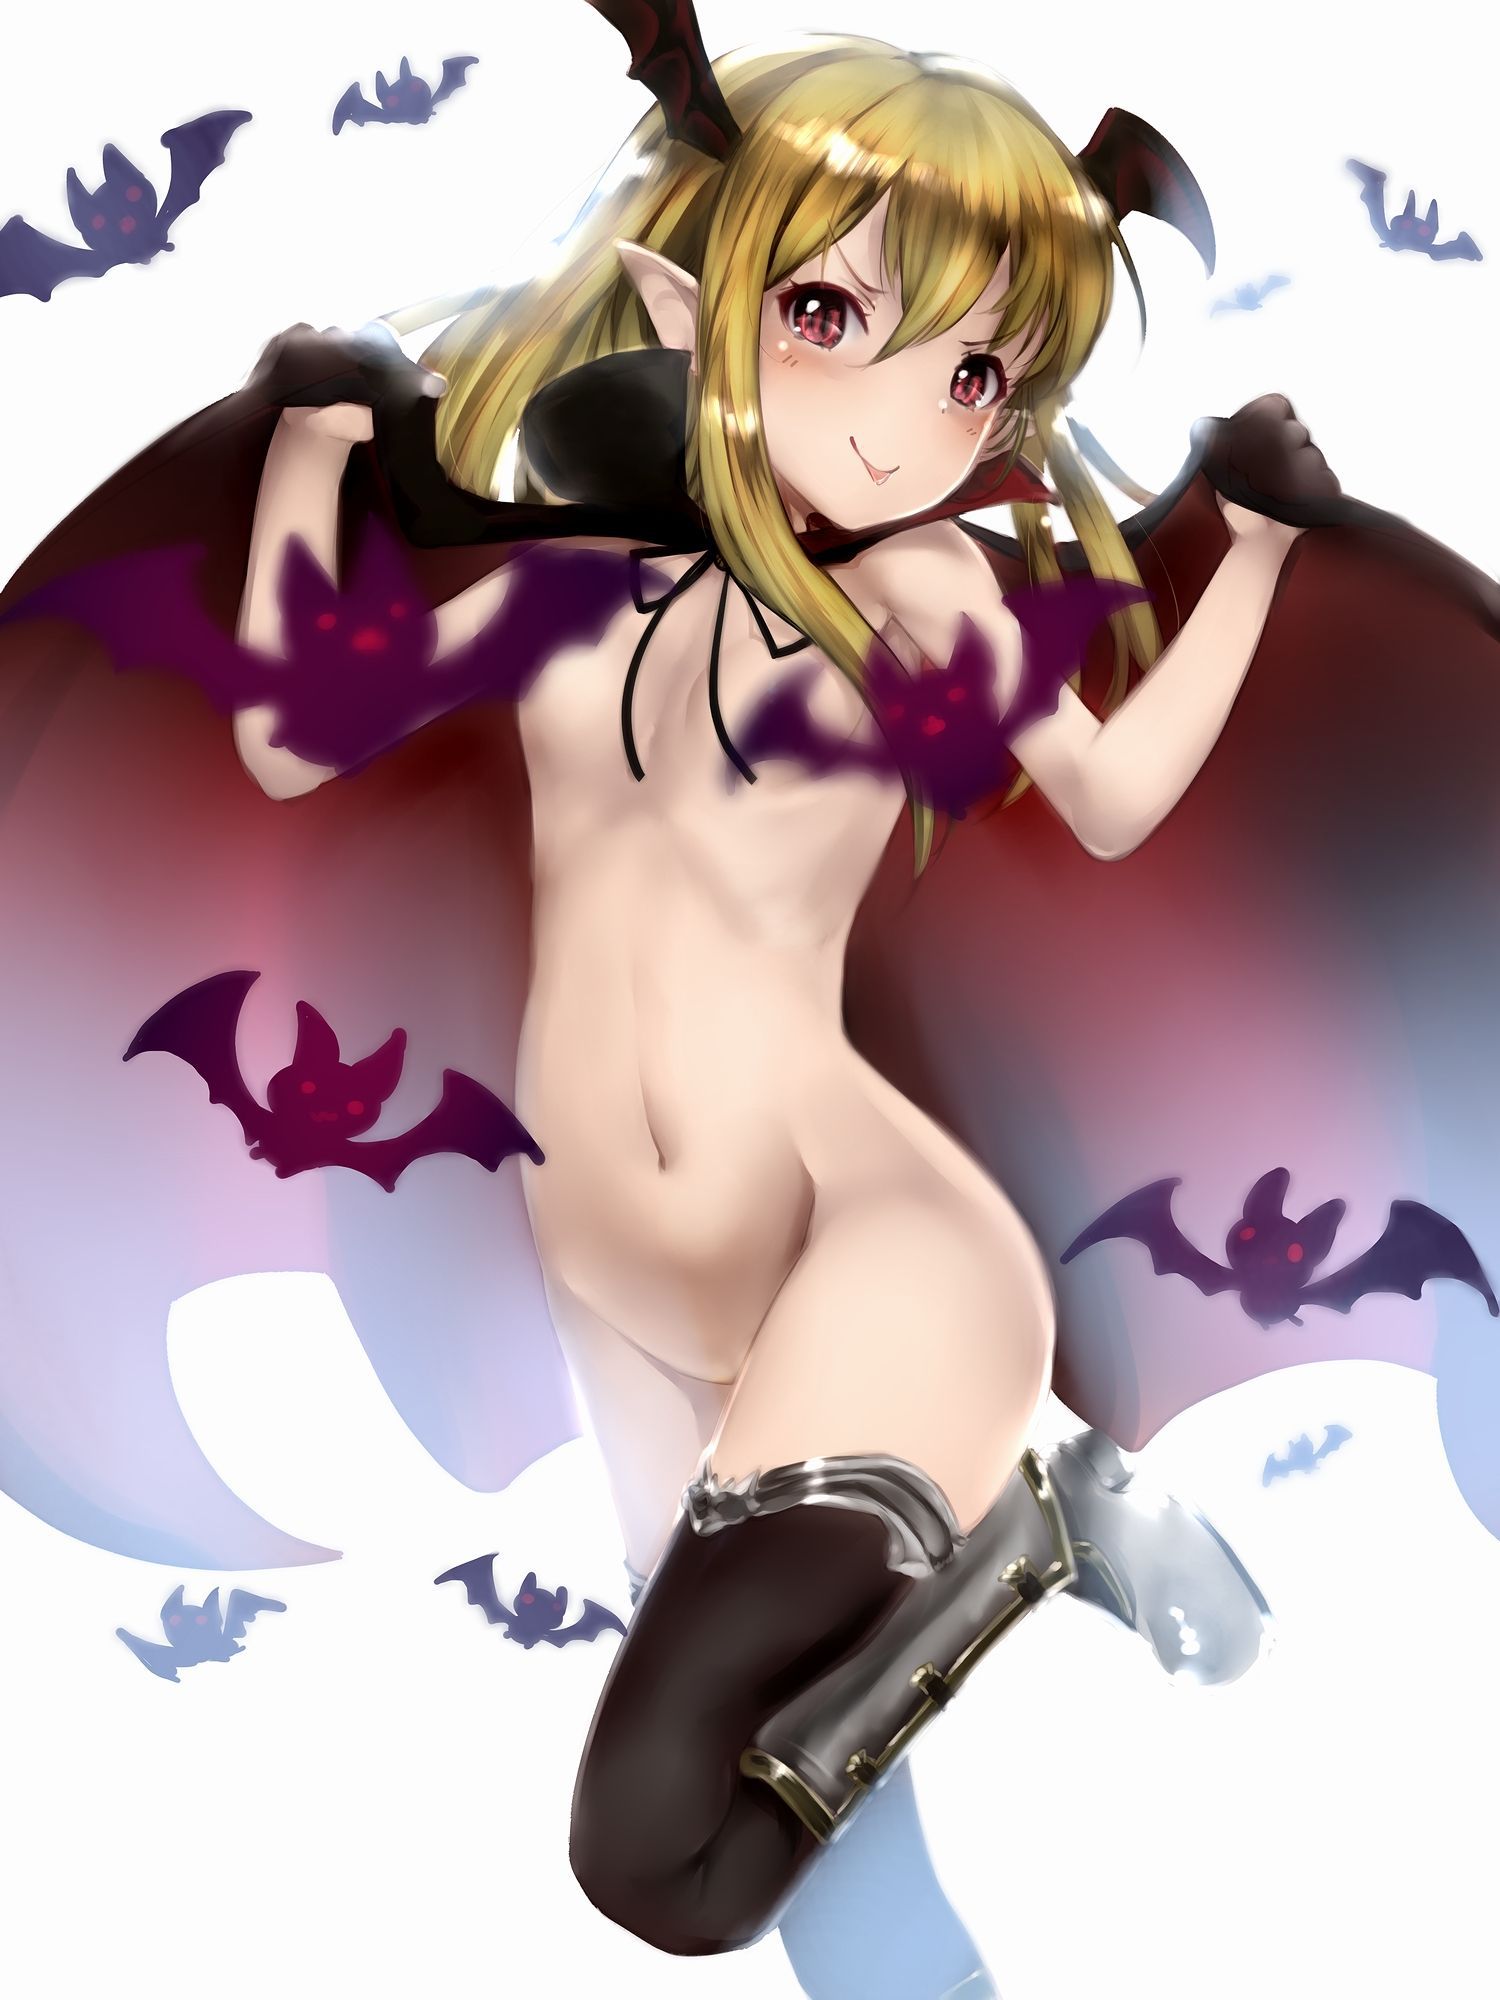 Vampy Chan (secondary-ZIP) to put on the shoes and cute images together "of God bahamut and grumble fantasy." 41